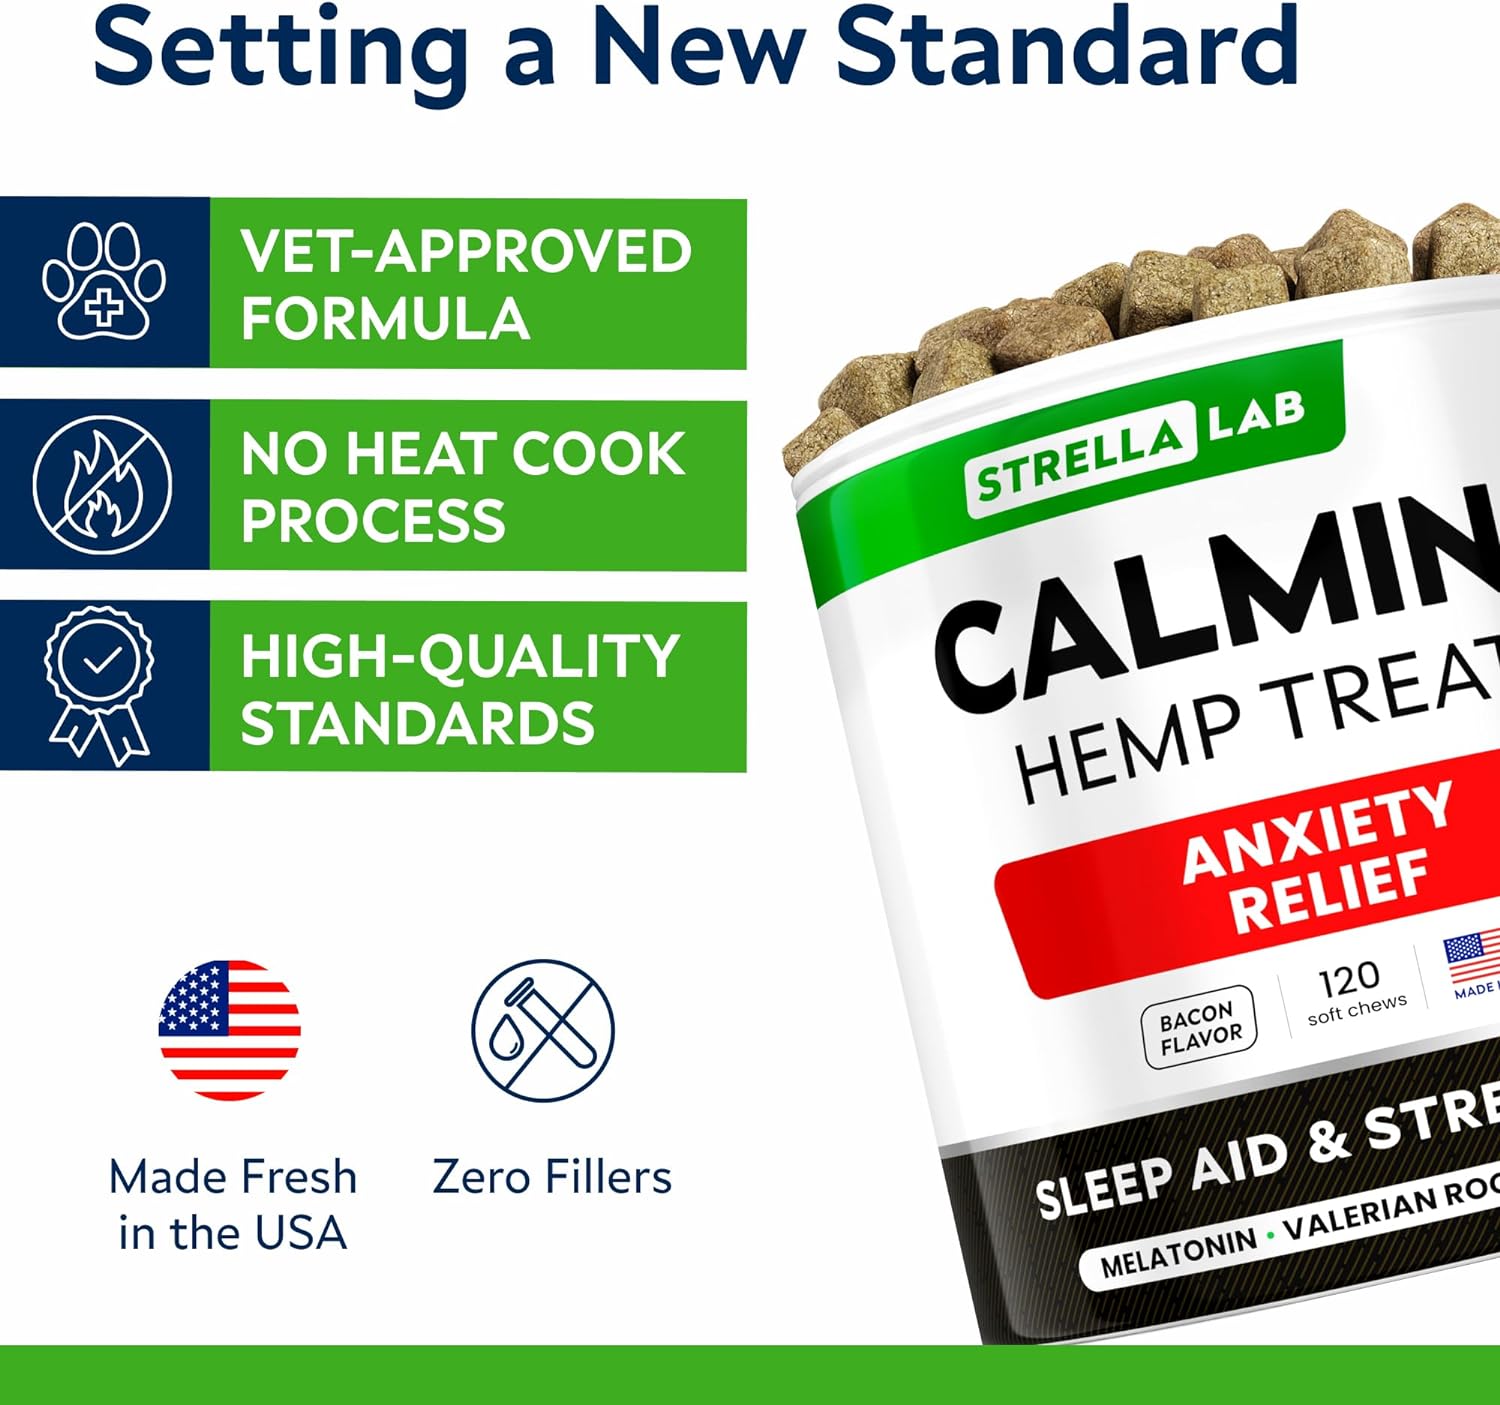 STRELLALAB Hemp Calming Chews for Dogs Anxiety Relief - Made in USA w/Hemp Oil - Dog Training & Behavior Aid - Natural Stress Relief During Firework, Storm, Separation, Barking - 120 Treats - Bacon : Pet Supplies